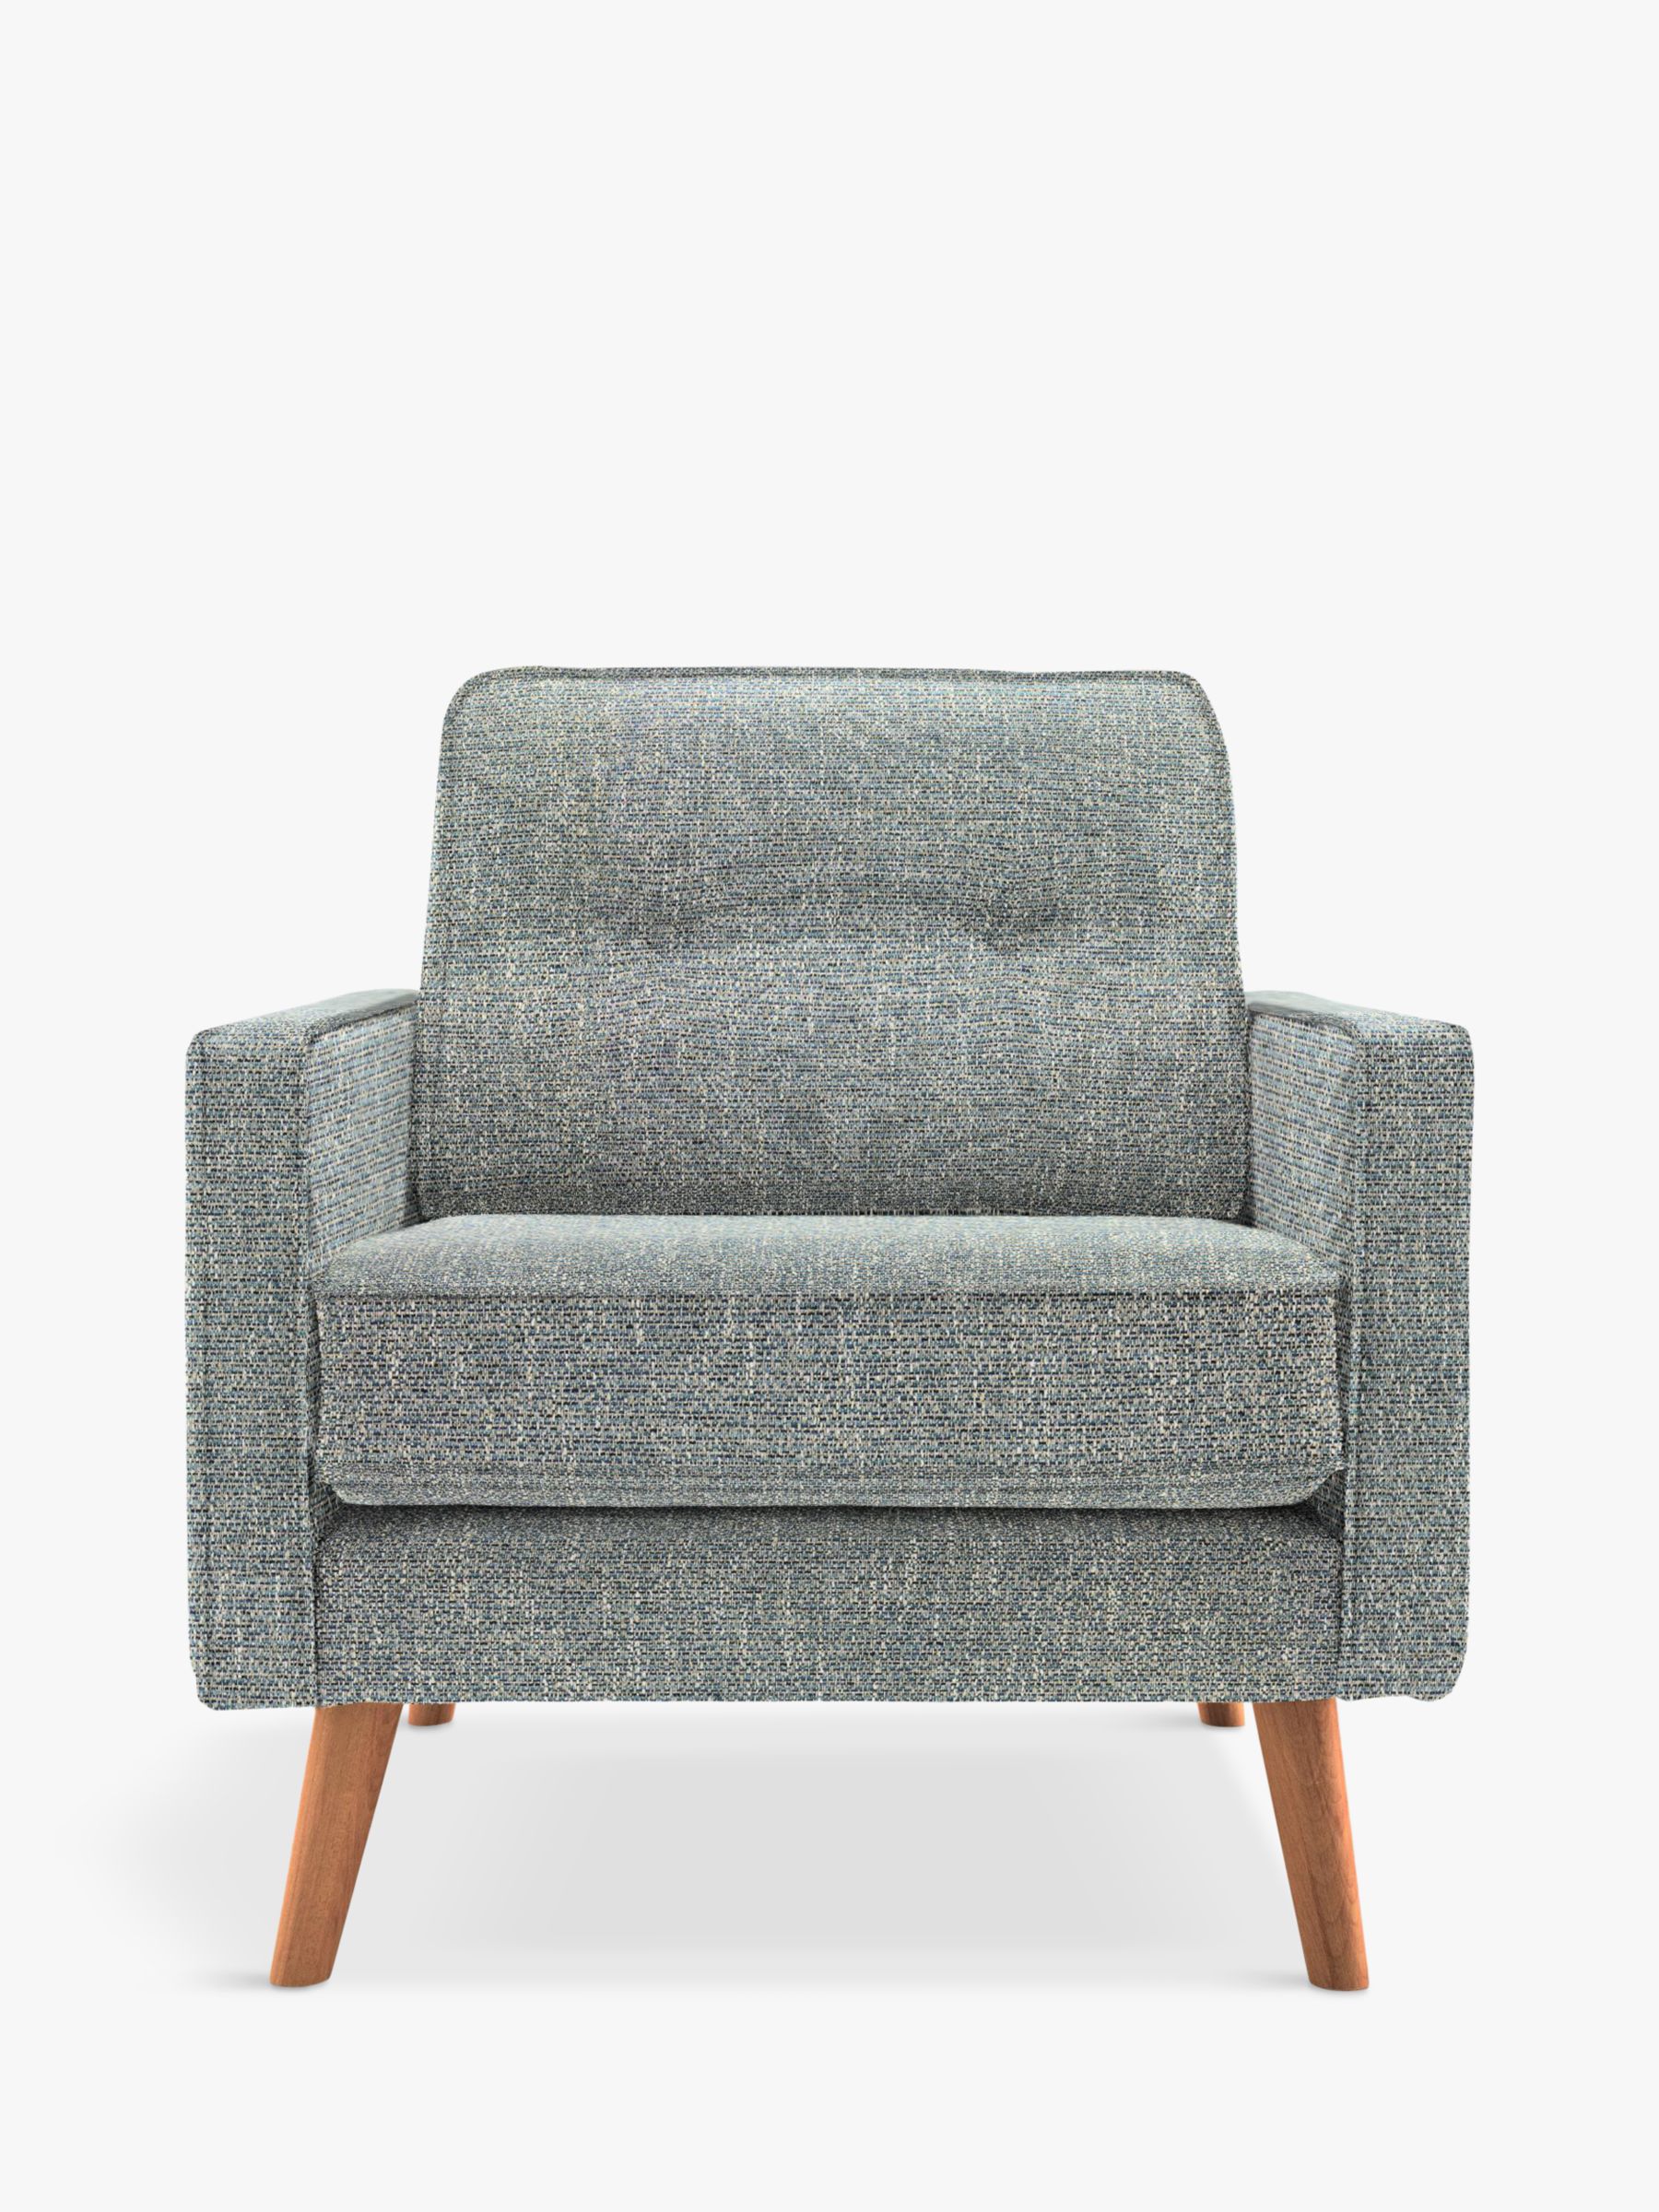 The Sixty Five Range, G Plan Vintage The Sixty Five Armchair, Etch Ink